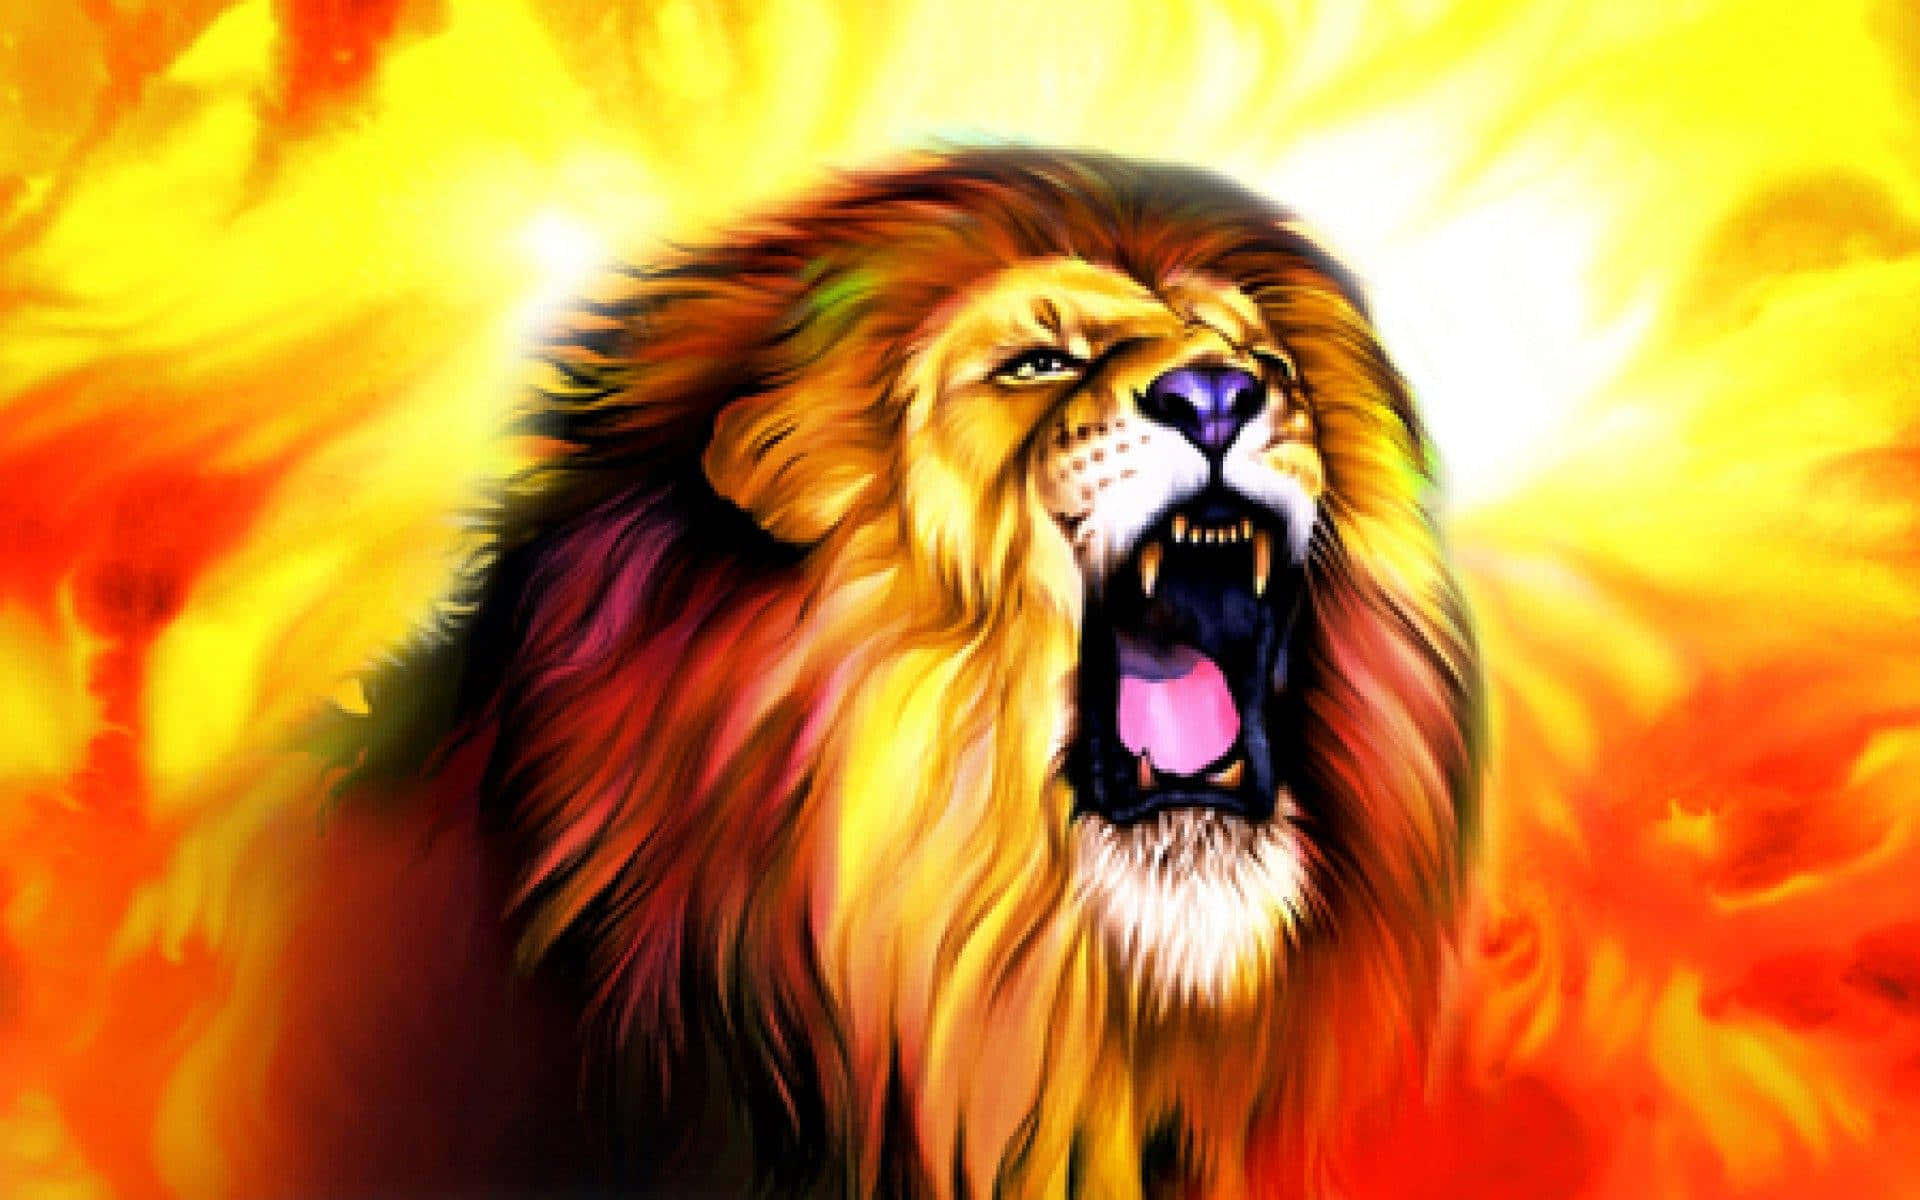 Roaring Lion On A Hot Day Wallpaper